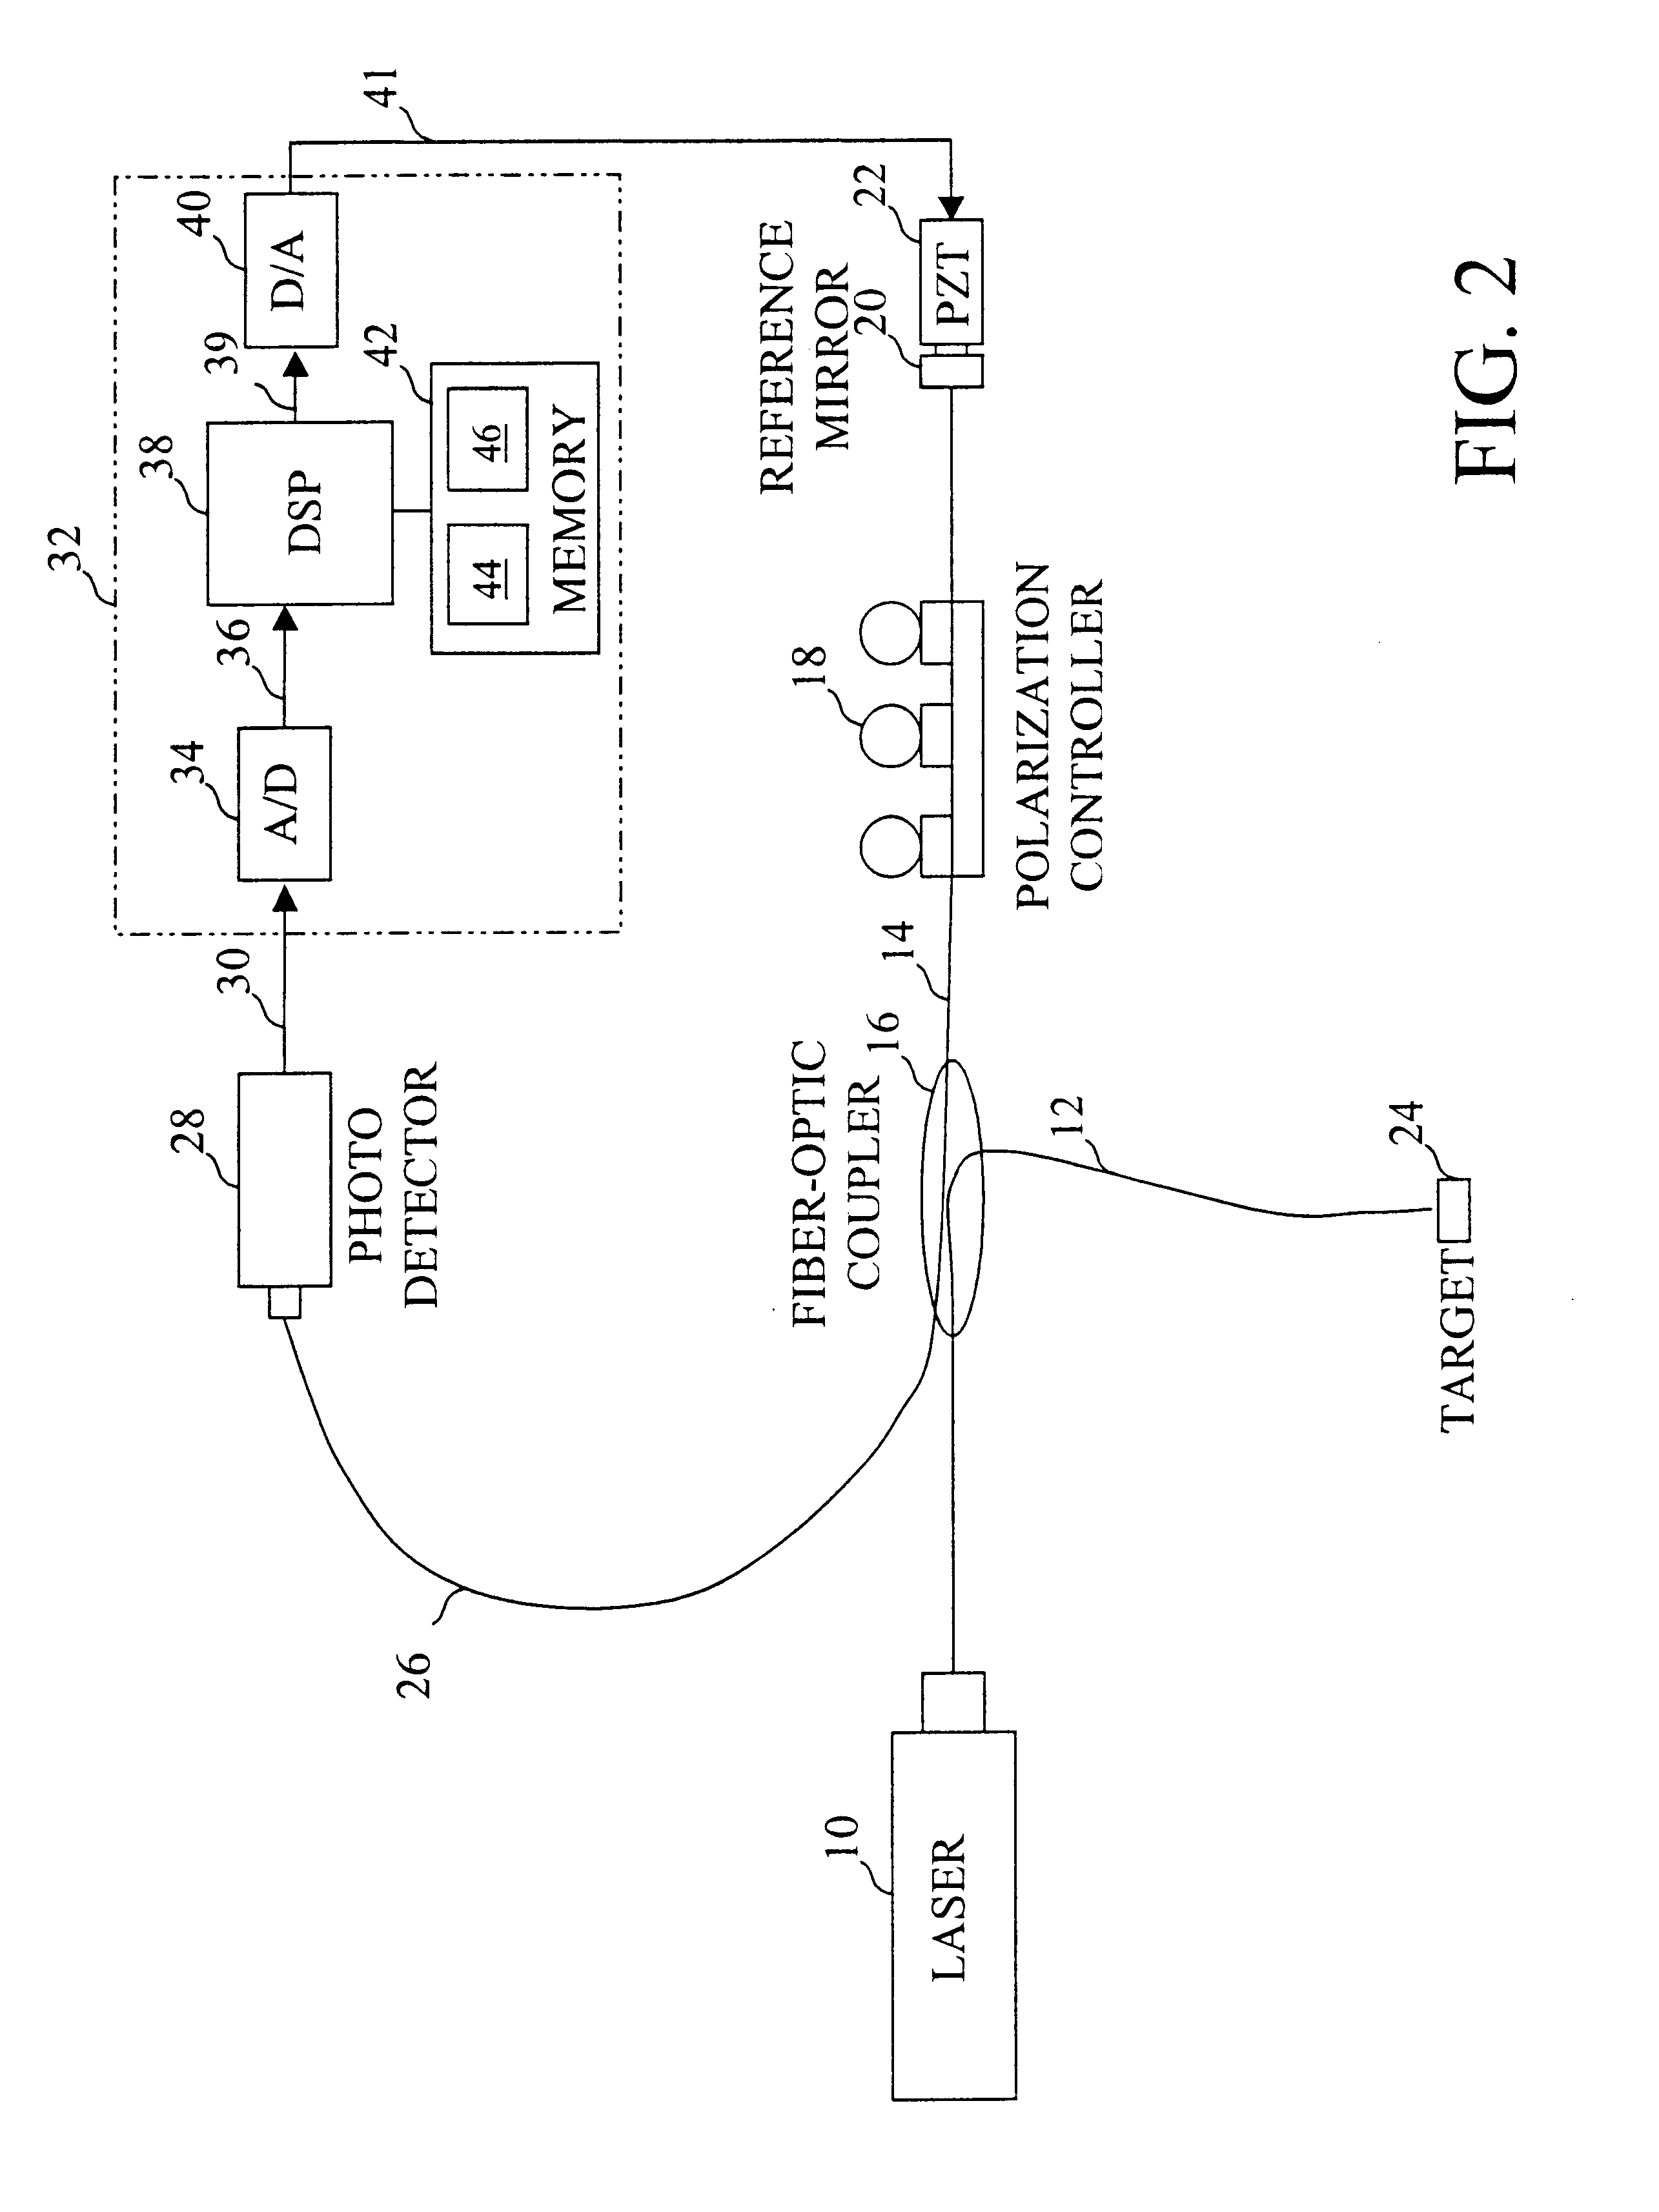 Method and system for stabilizing and demodulating an interferometer at quadrature